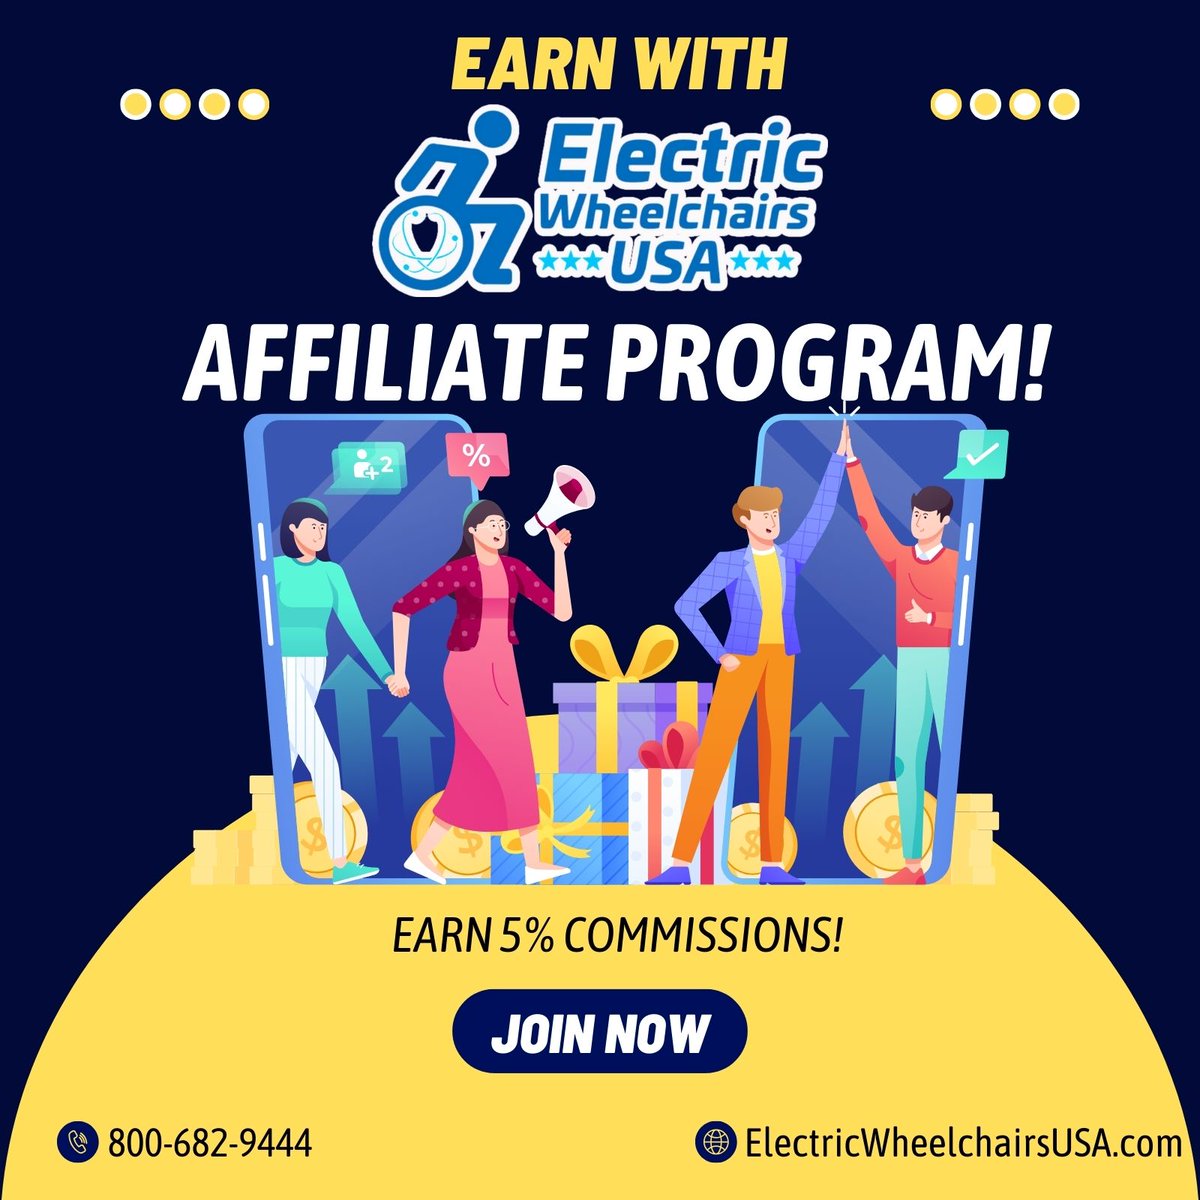 Join our Affiliate Program for top-notch mobility products, leading brands, a 5% commission rate, and easy earnings. Sign up now! 

Learn more here👇
electricwheelchairsusa.com/pages/referral…

 #ElectricWheelchairsUSA #AffiliateOpportunity  #EarnWithEveryReferral #EasyIncome  #JoinAndEarn